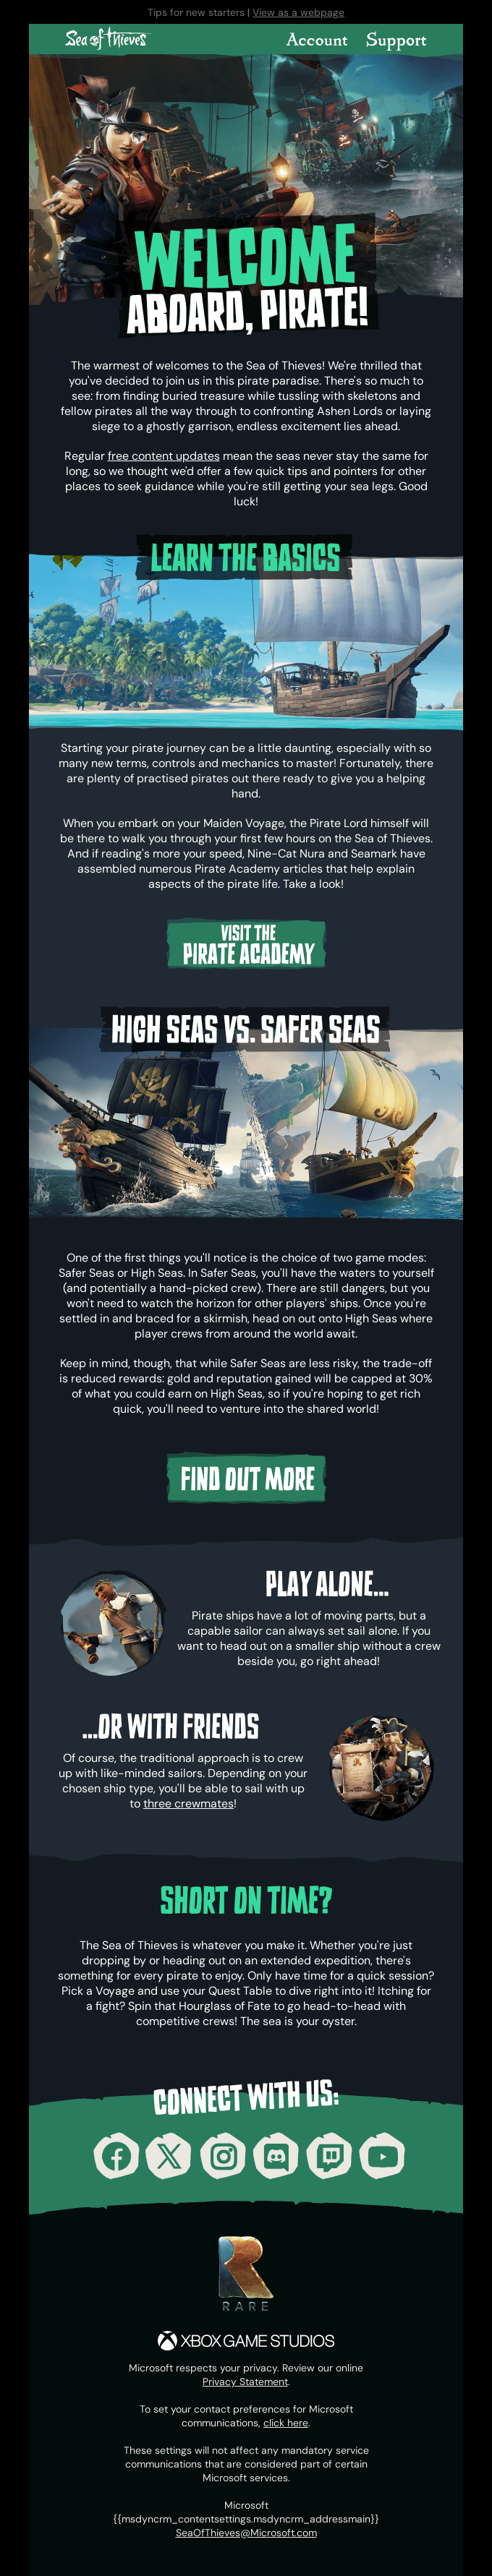 Welcome to Sea of Thieves!